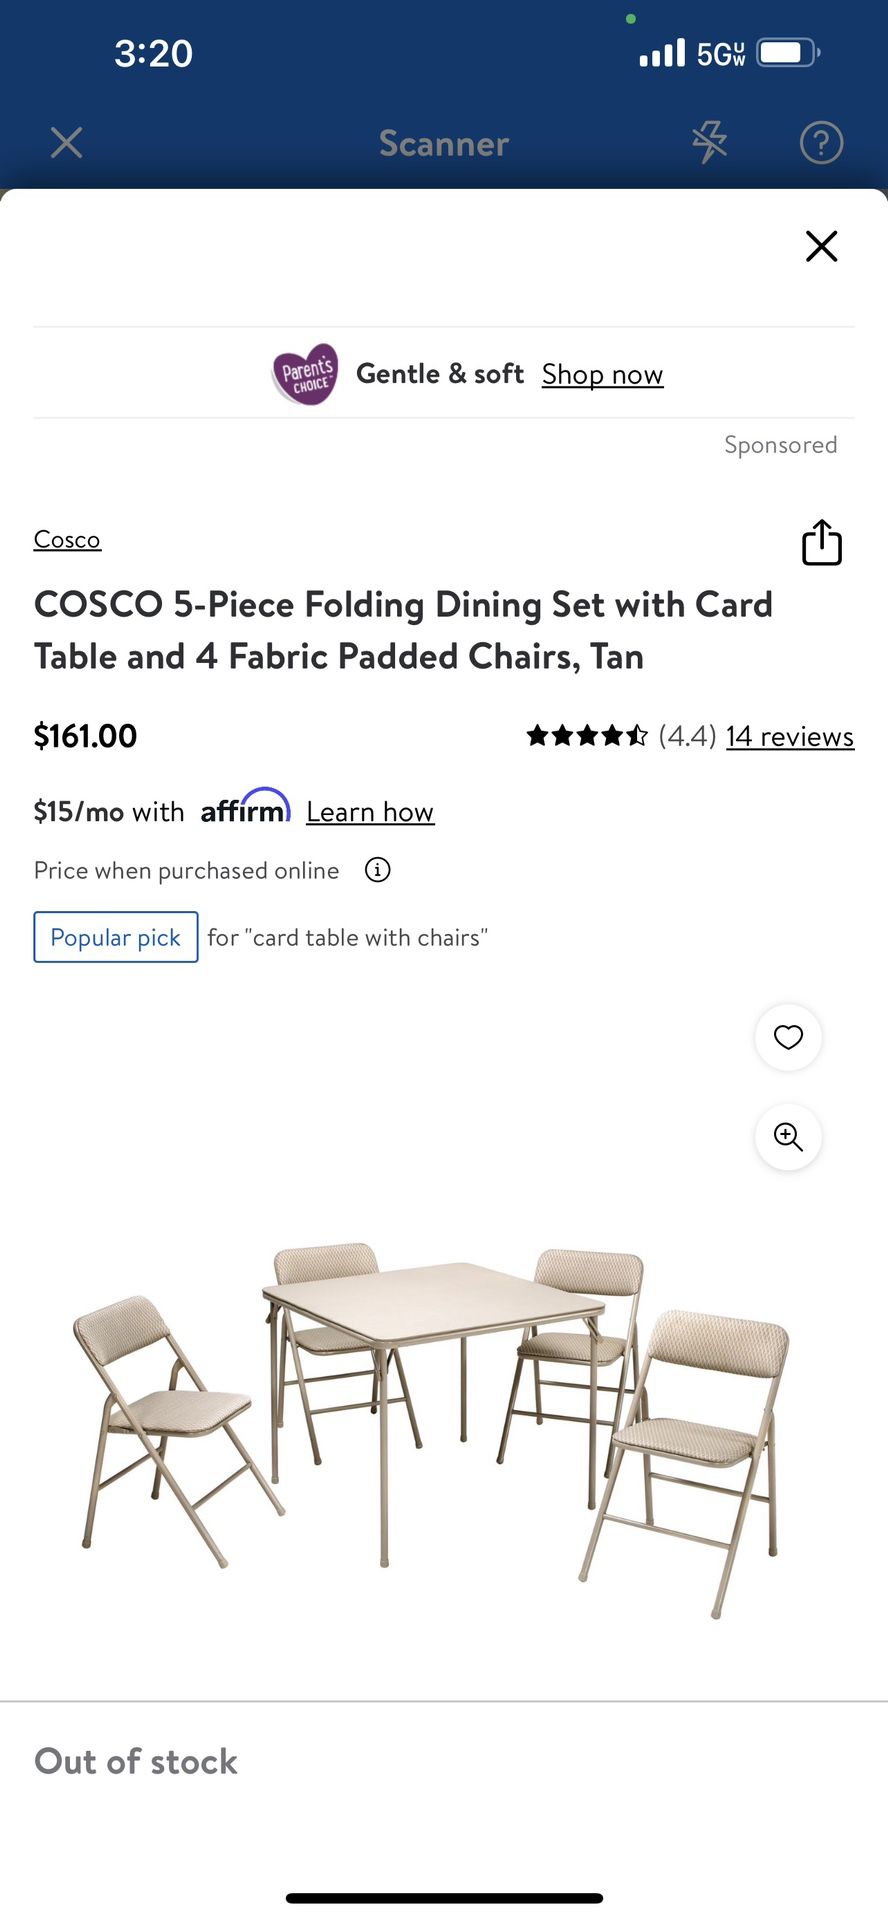 COSCO 5-Piece Folding Dining Set with Card Table and 4 Fabric Padded Chairs, Tan  Pm if interested 